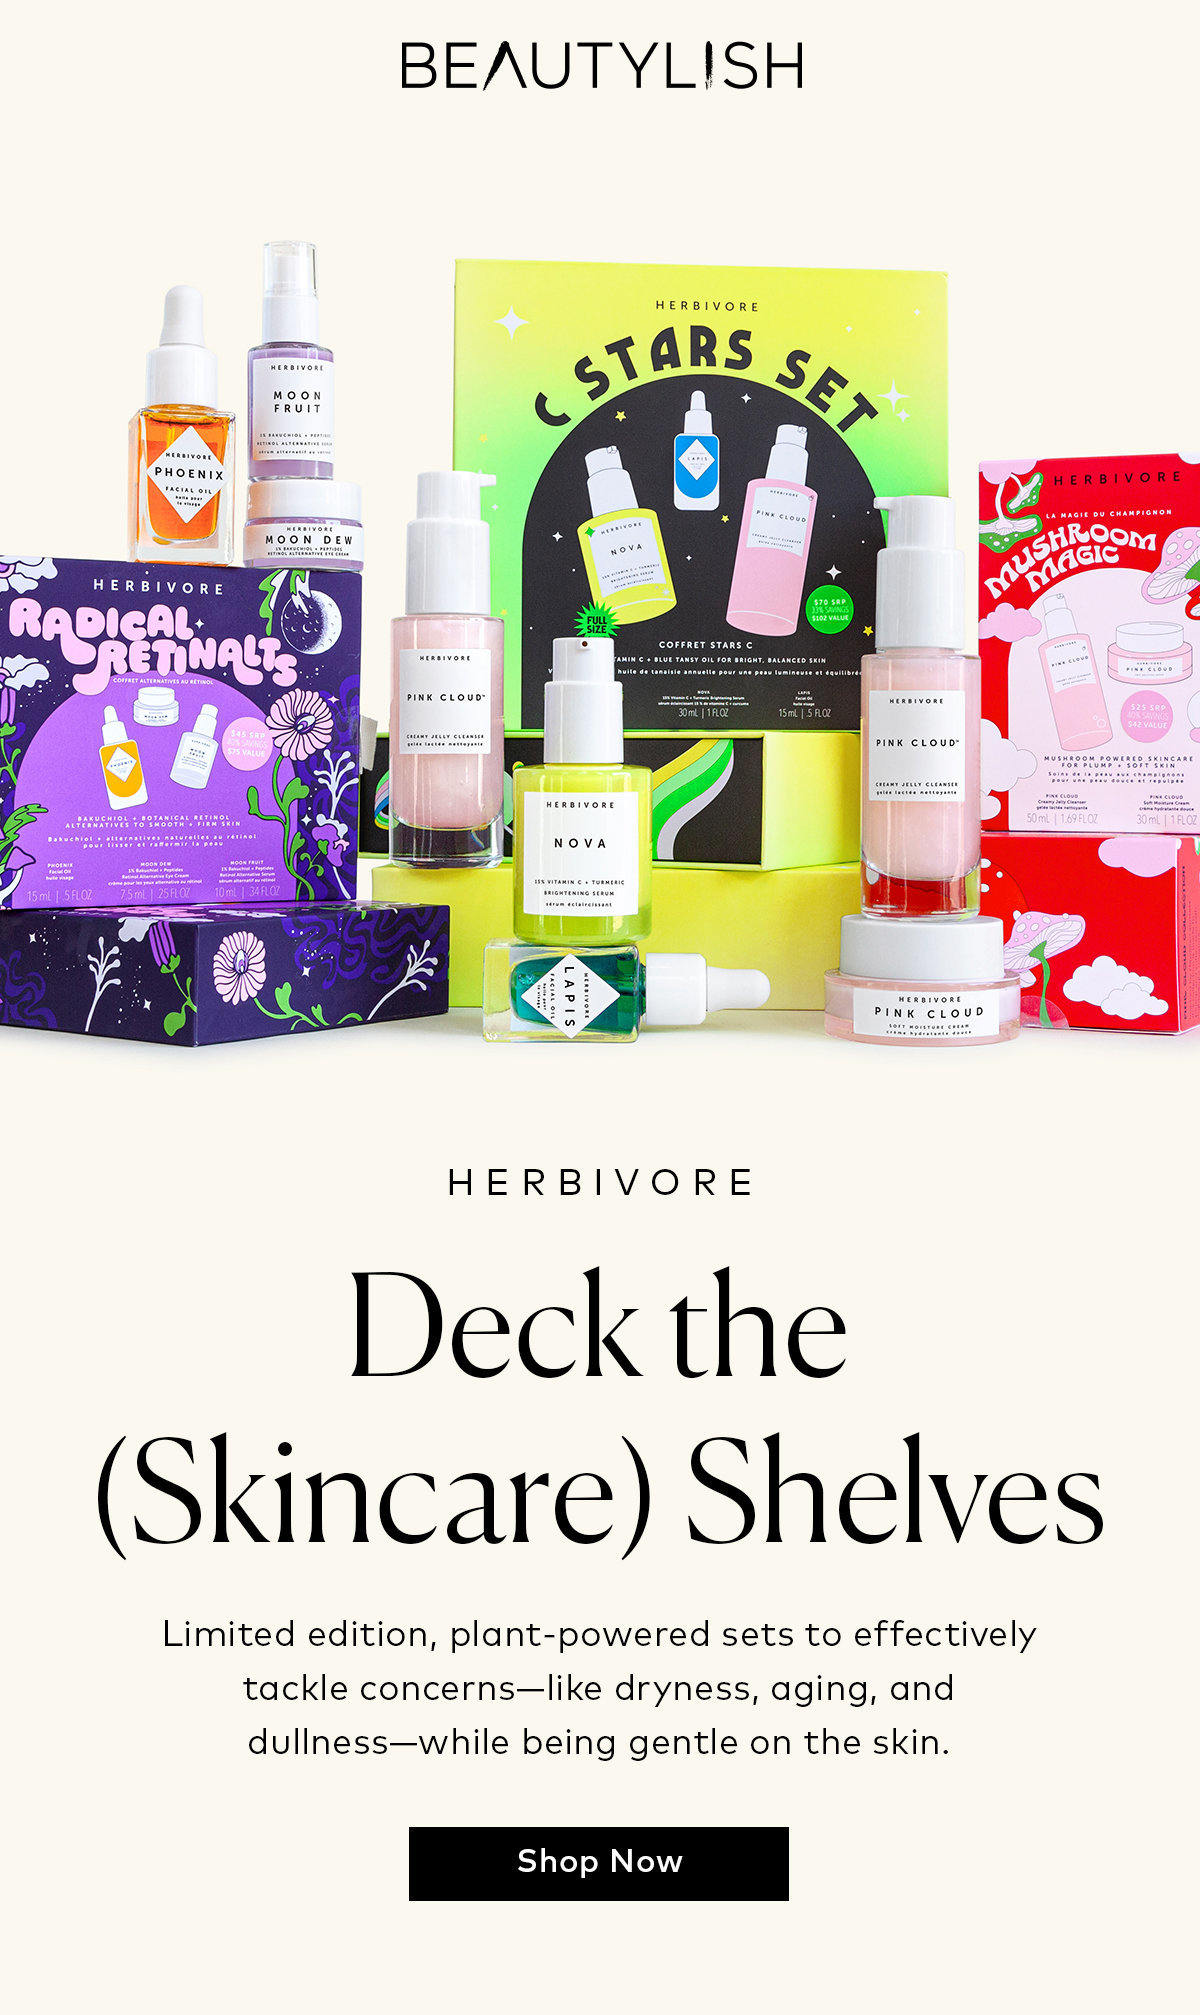 BEAUTYLISH i @ HERBIVORE Deck the Skincare Shelves Limited edition, plant-powered sets to effectively tackle concernslike dryness, aging, and dullnesswhile being gentle on the skin. Shop Now 